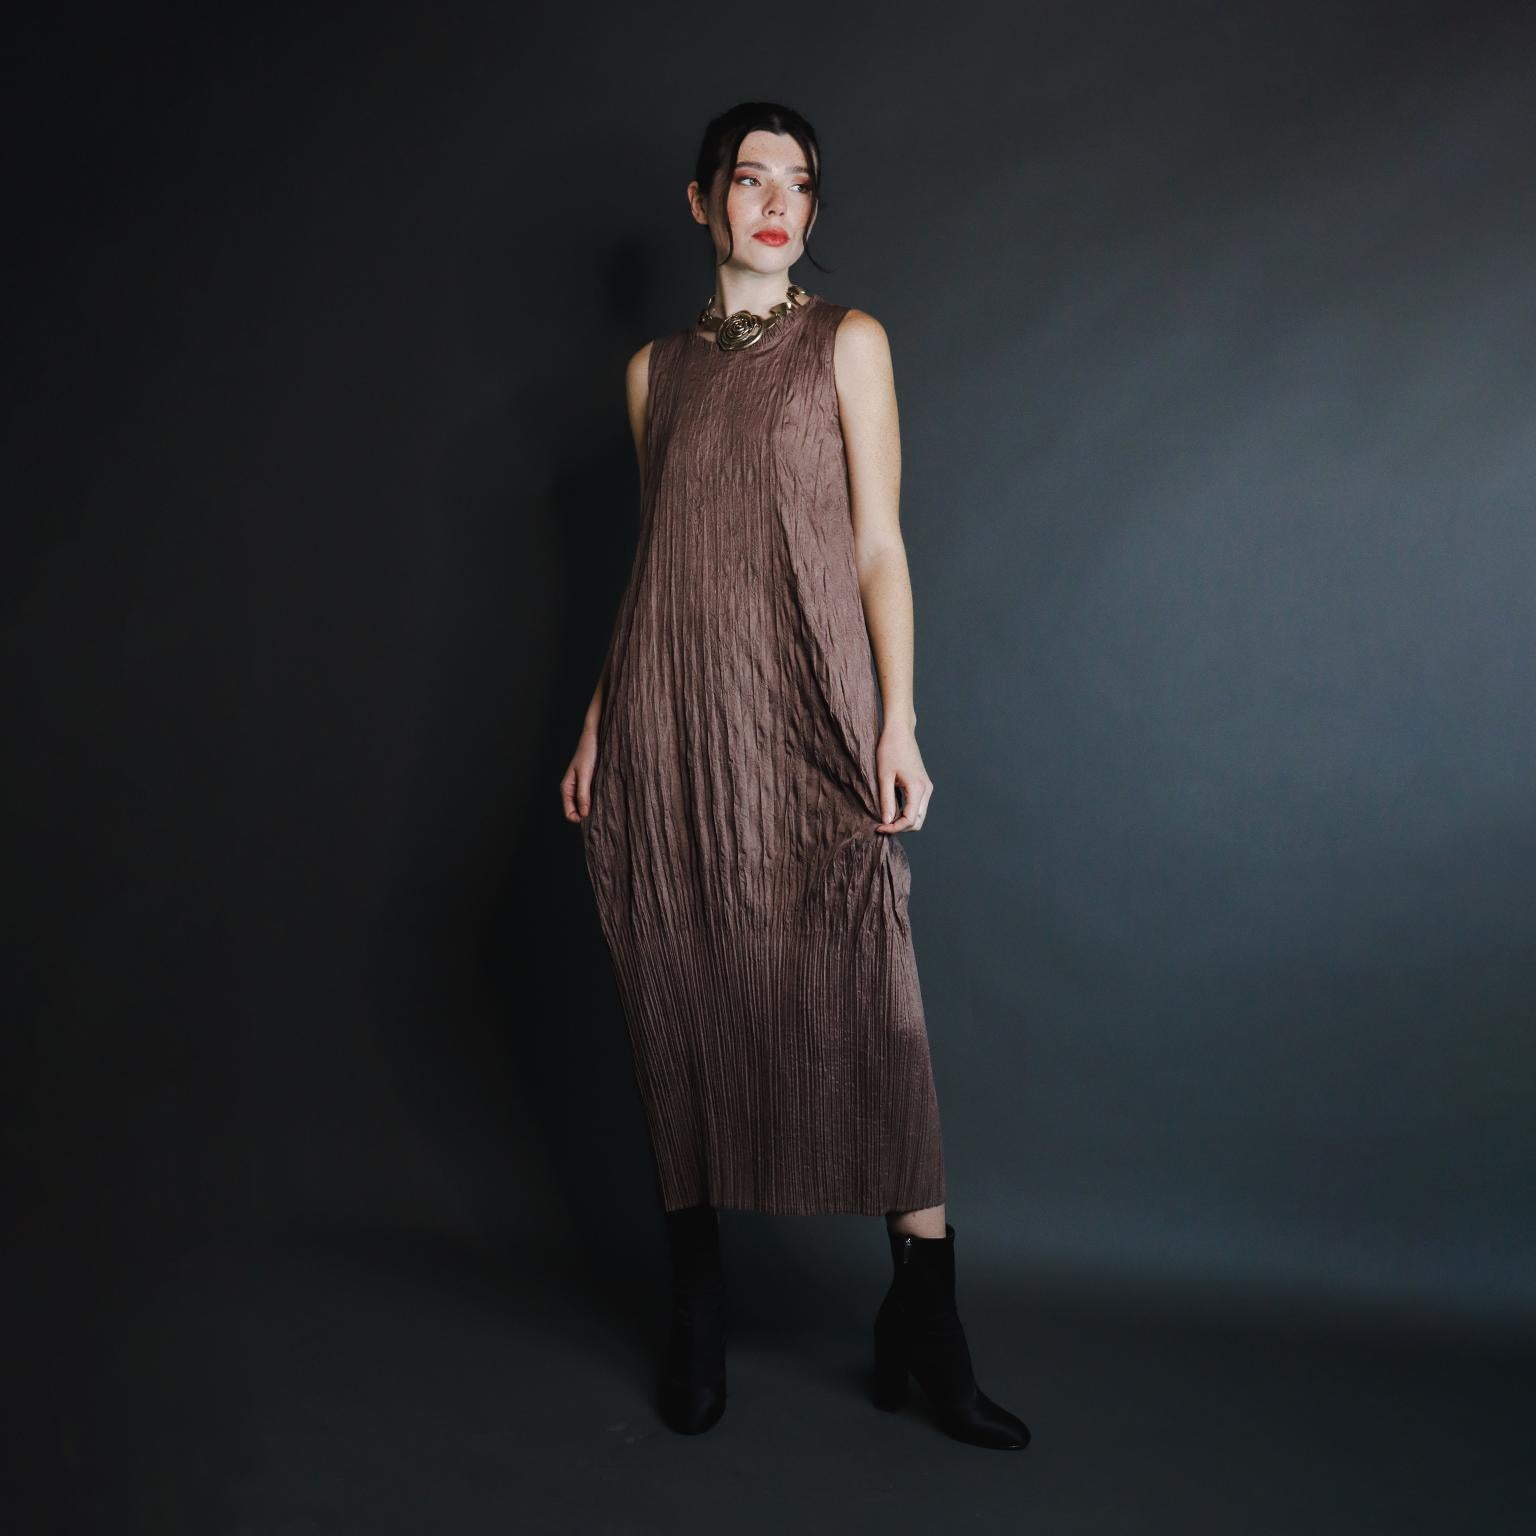 We always love finding vintage Issey Miyake avant garde pieces and this particular dress came from and estate of a woman who lived in Japan in the late 1990's and early 2000's and collected Issey Miyake pieces. This pretty sleeveless soft brown